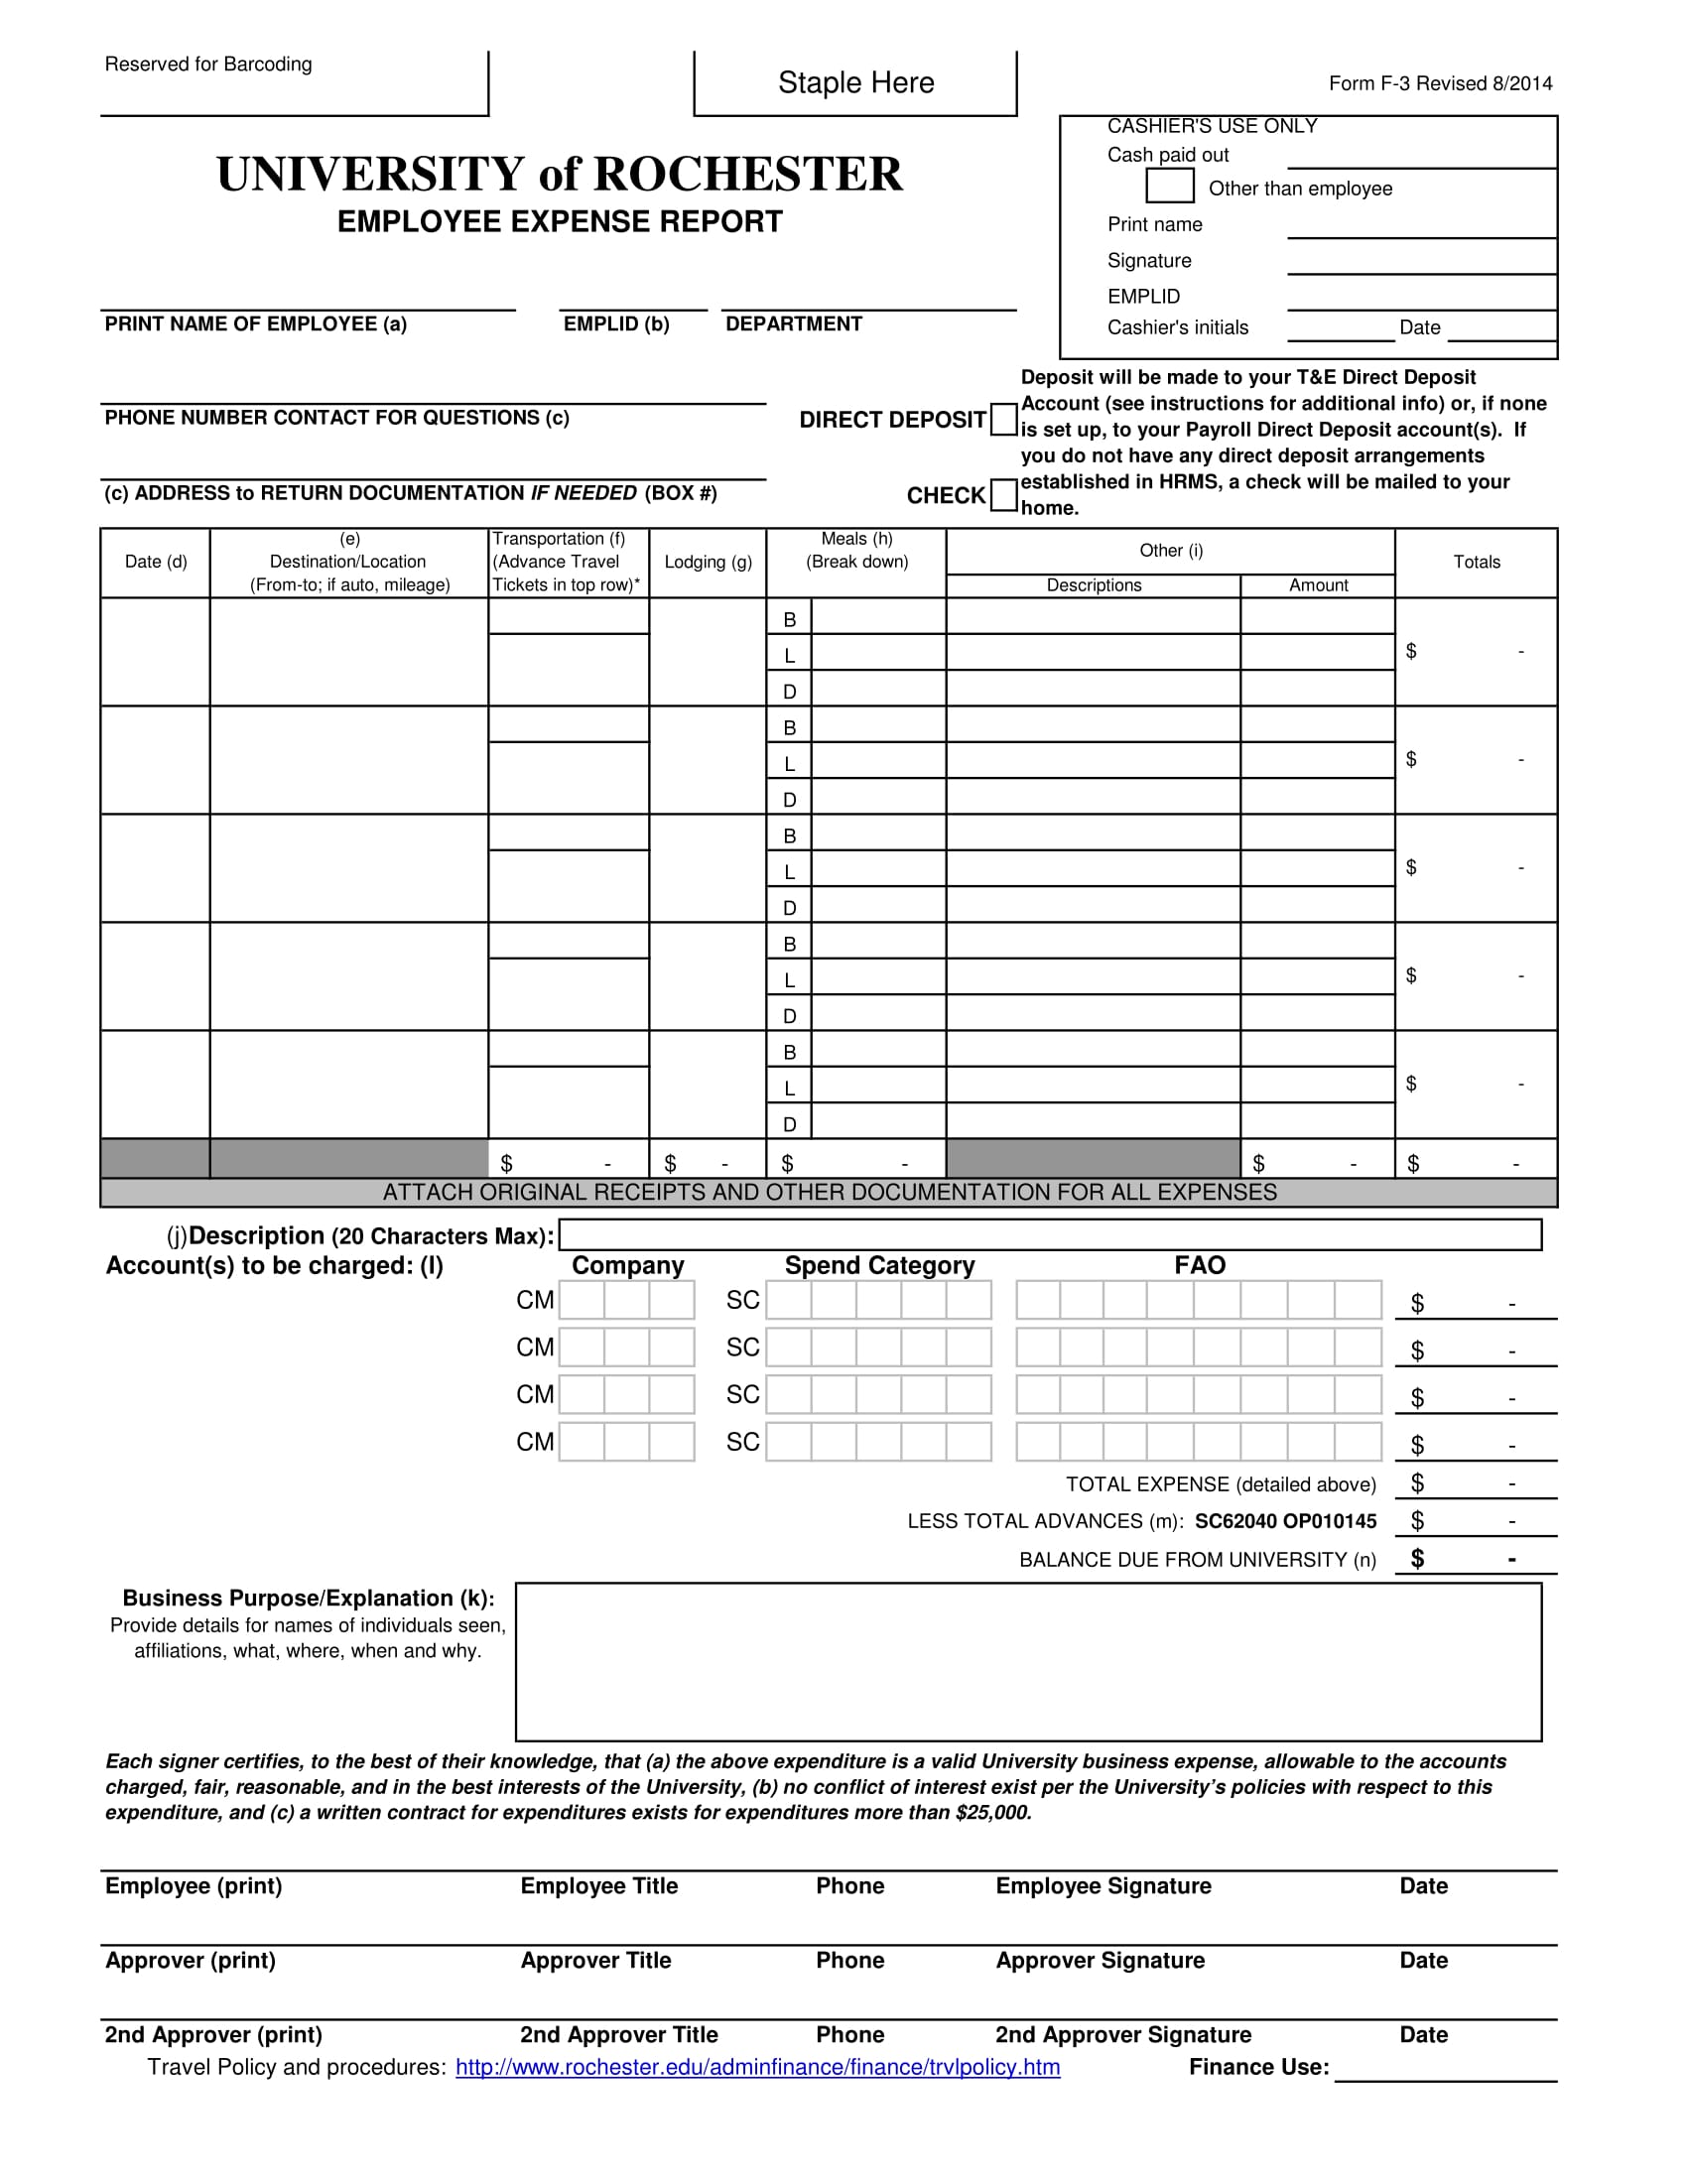 employee expense report form 1